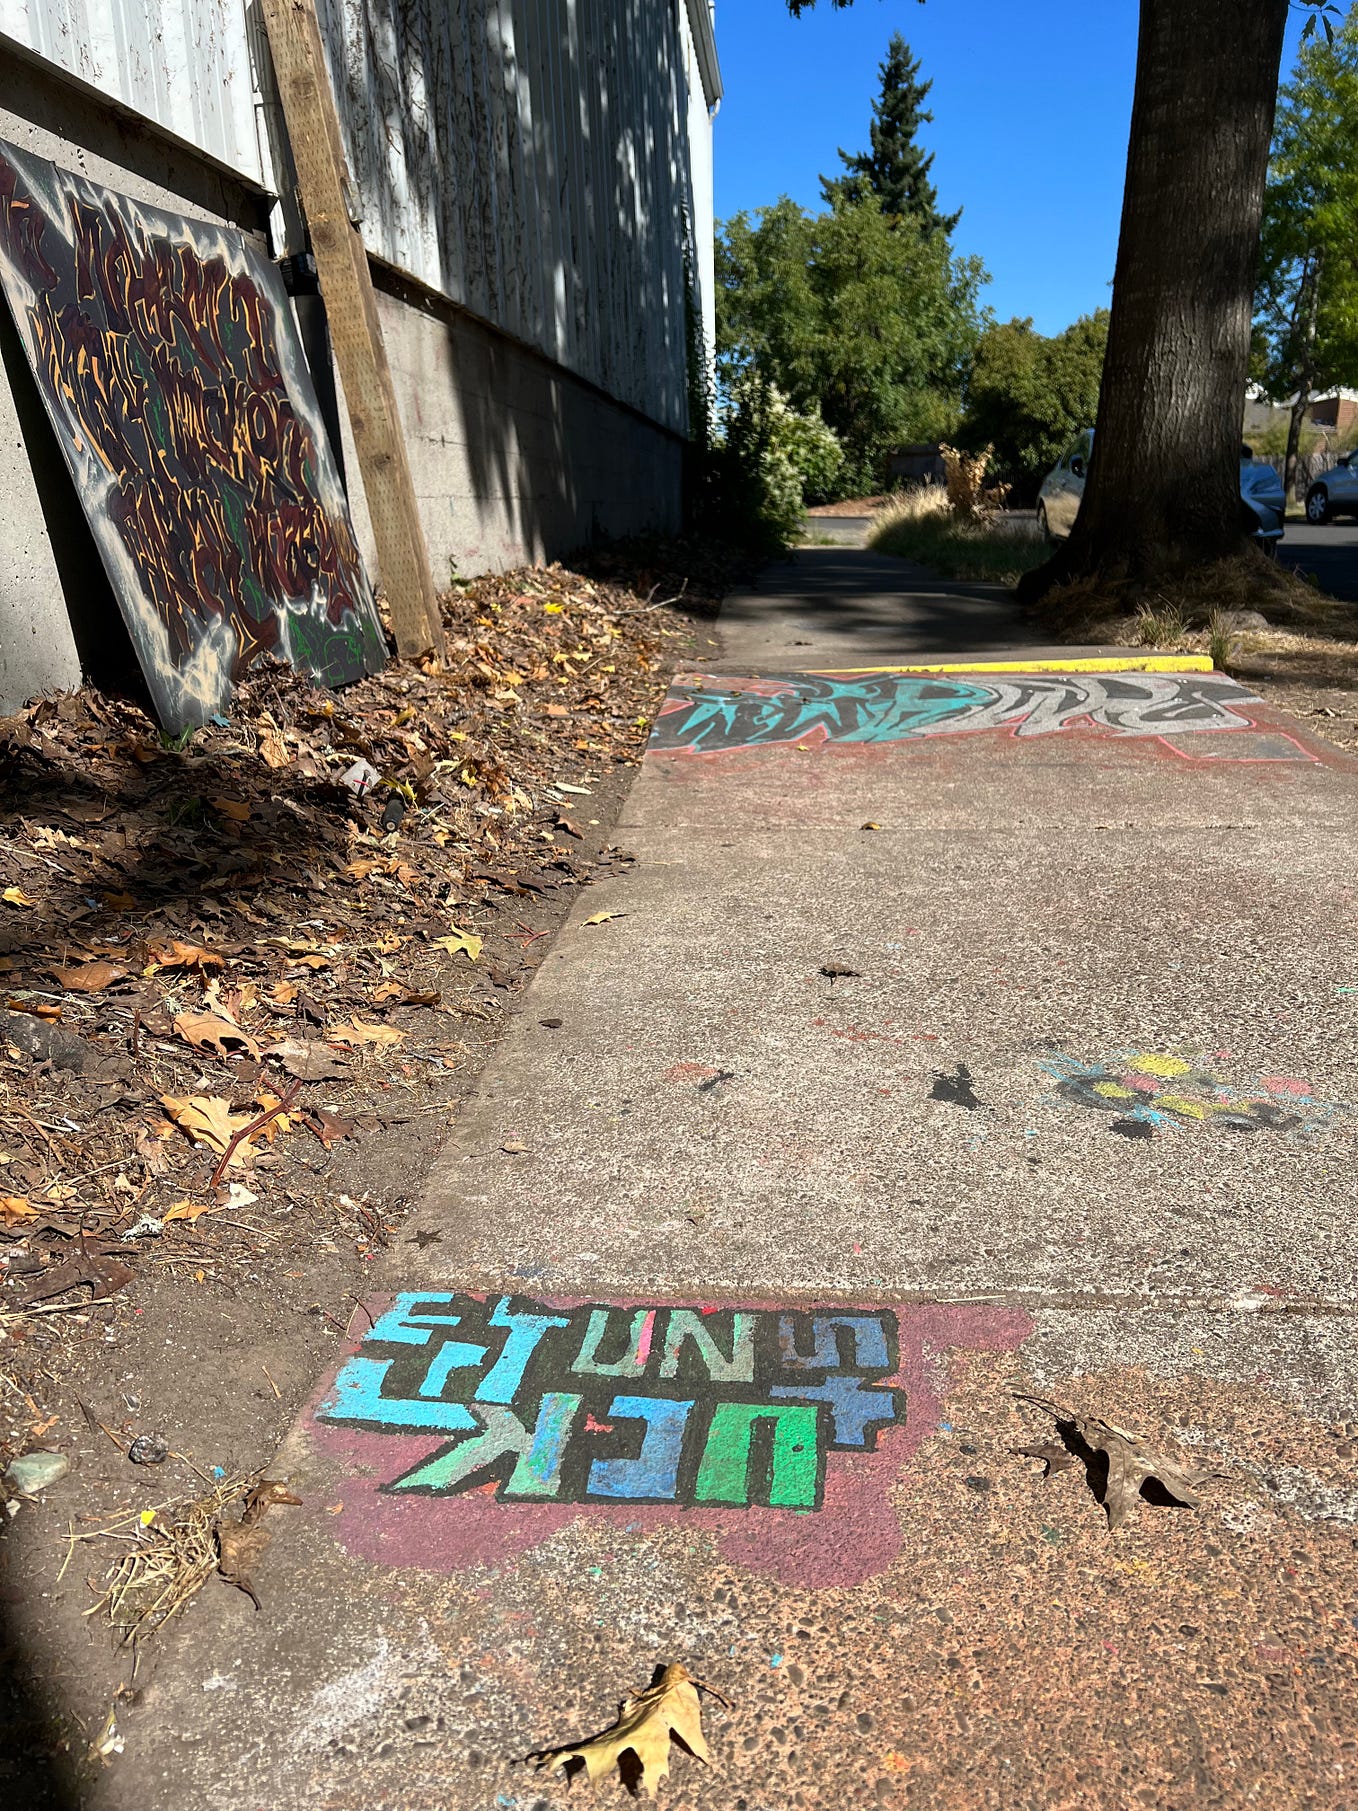 Painted graffiti art on the sidewalk in front of a couple of trees, foreground says, “Get unstuck”, with bright colors of blue, orange, and green. Background graffiti art is a group of unidentified letters. Autumn leaves litter the ground beside the concrete, and another painting in black and red graffiti on a board is propped up against a wall. Art courtesy of my homeless friend Maize, who lived across the street from my apartment, not fully pictured.